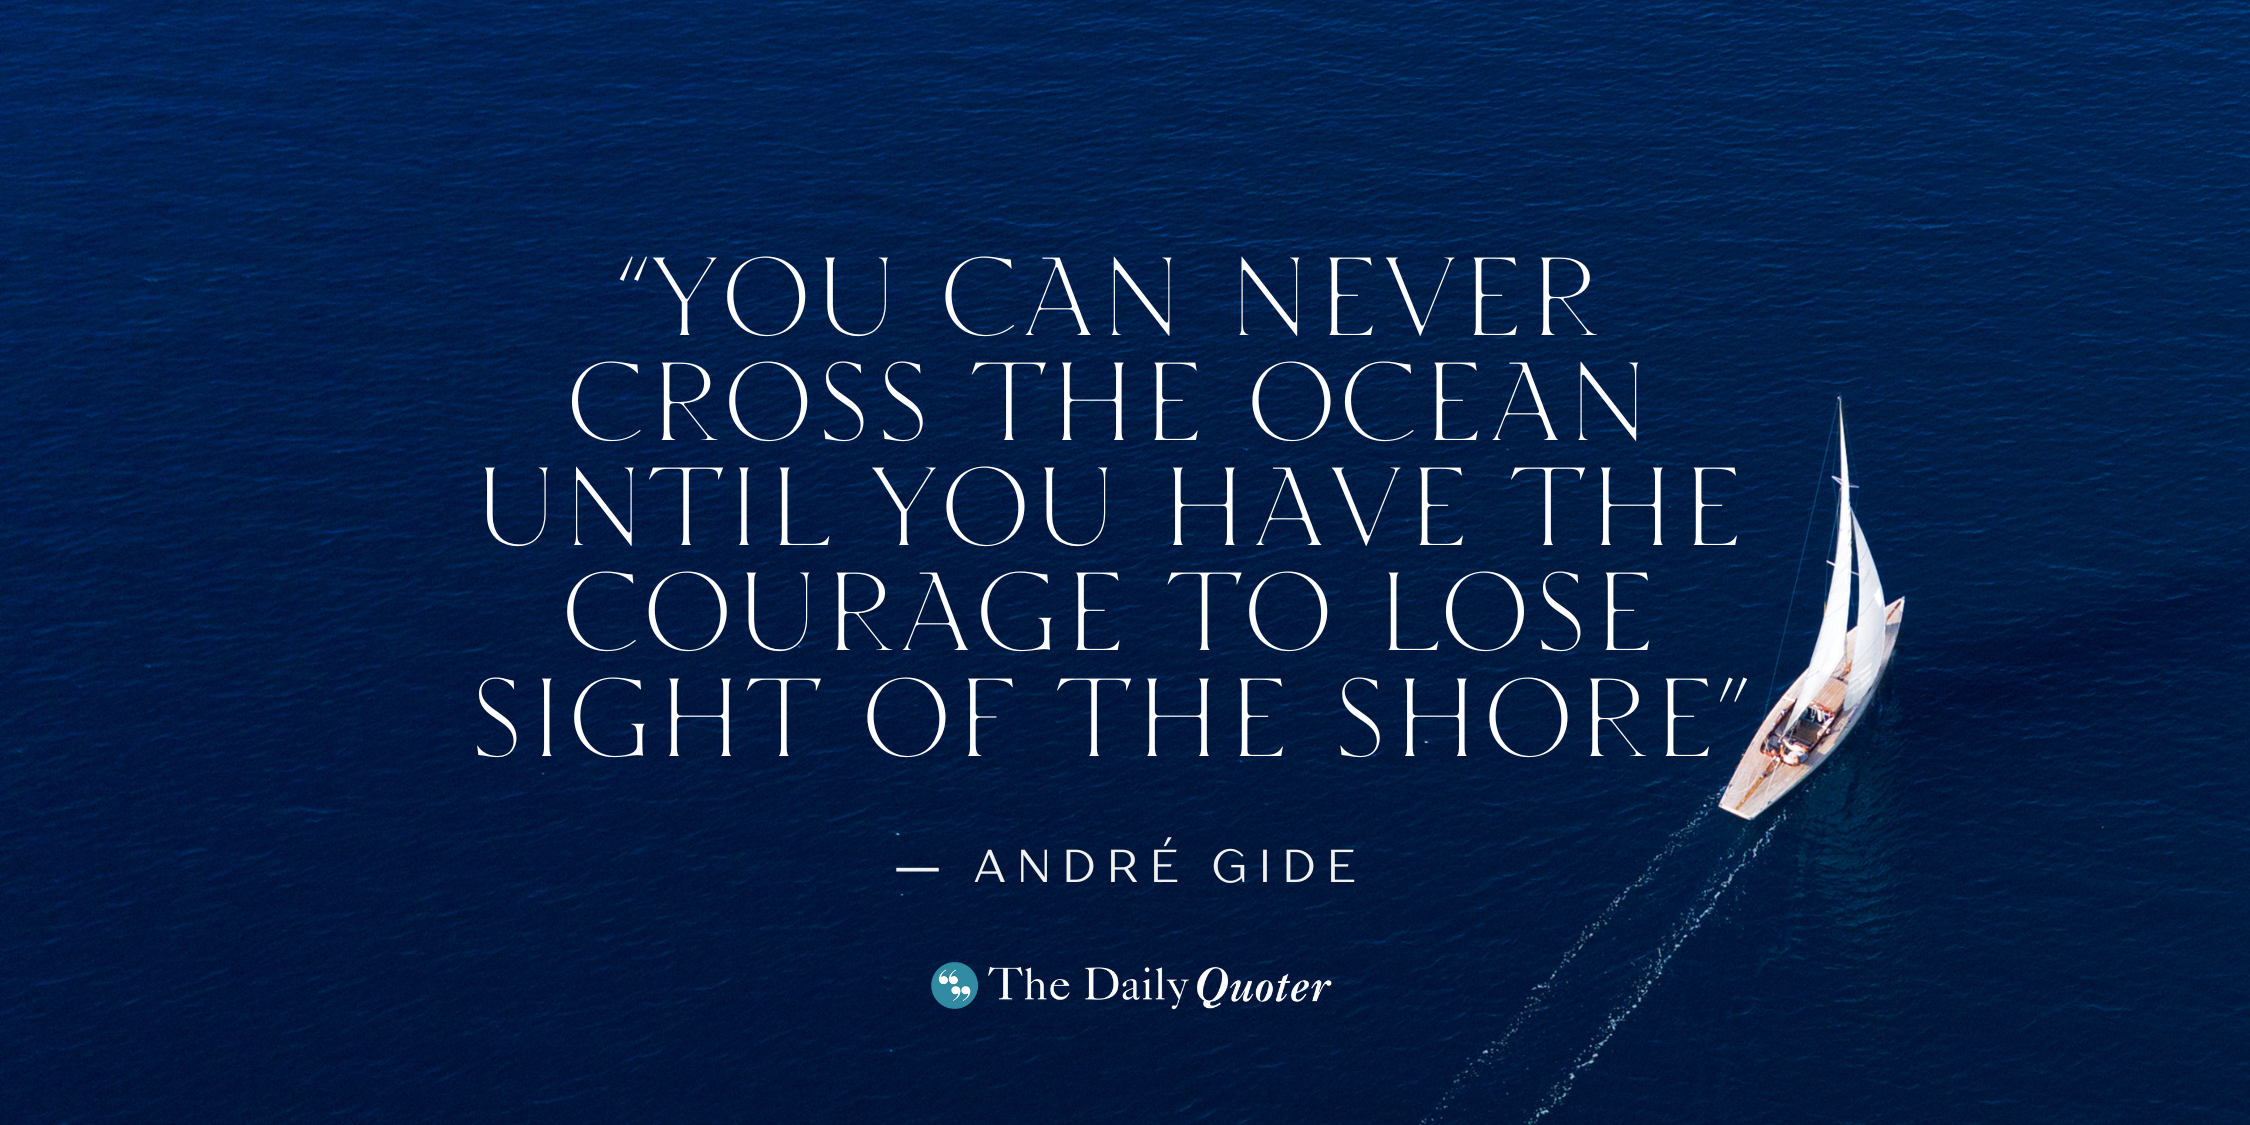 “You can never cross the ocean until you have the courage to lose sight of the shore” ― André Gide